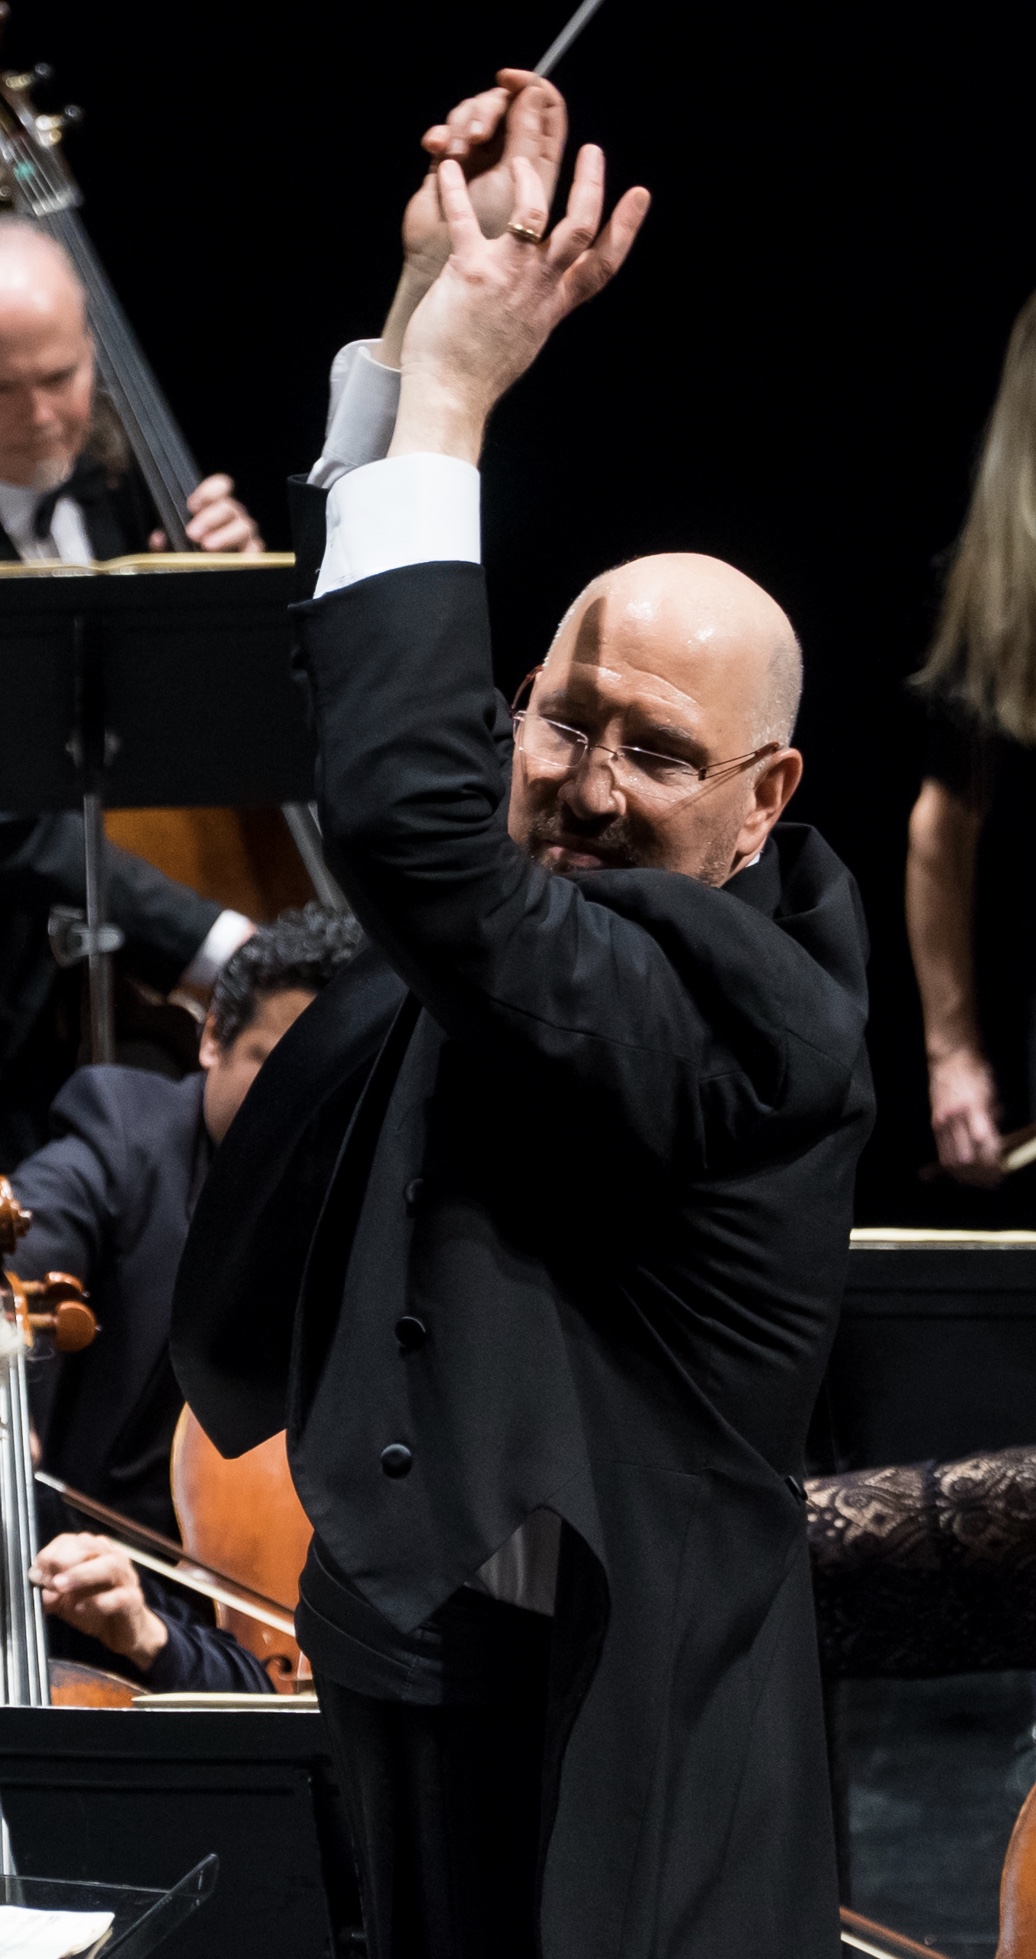 Jed Gaylin is the Bay Atlantic Symphony's Music Director.